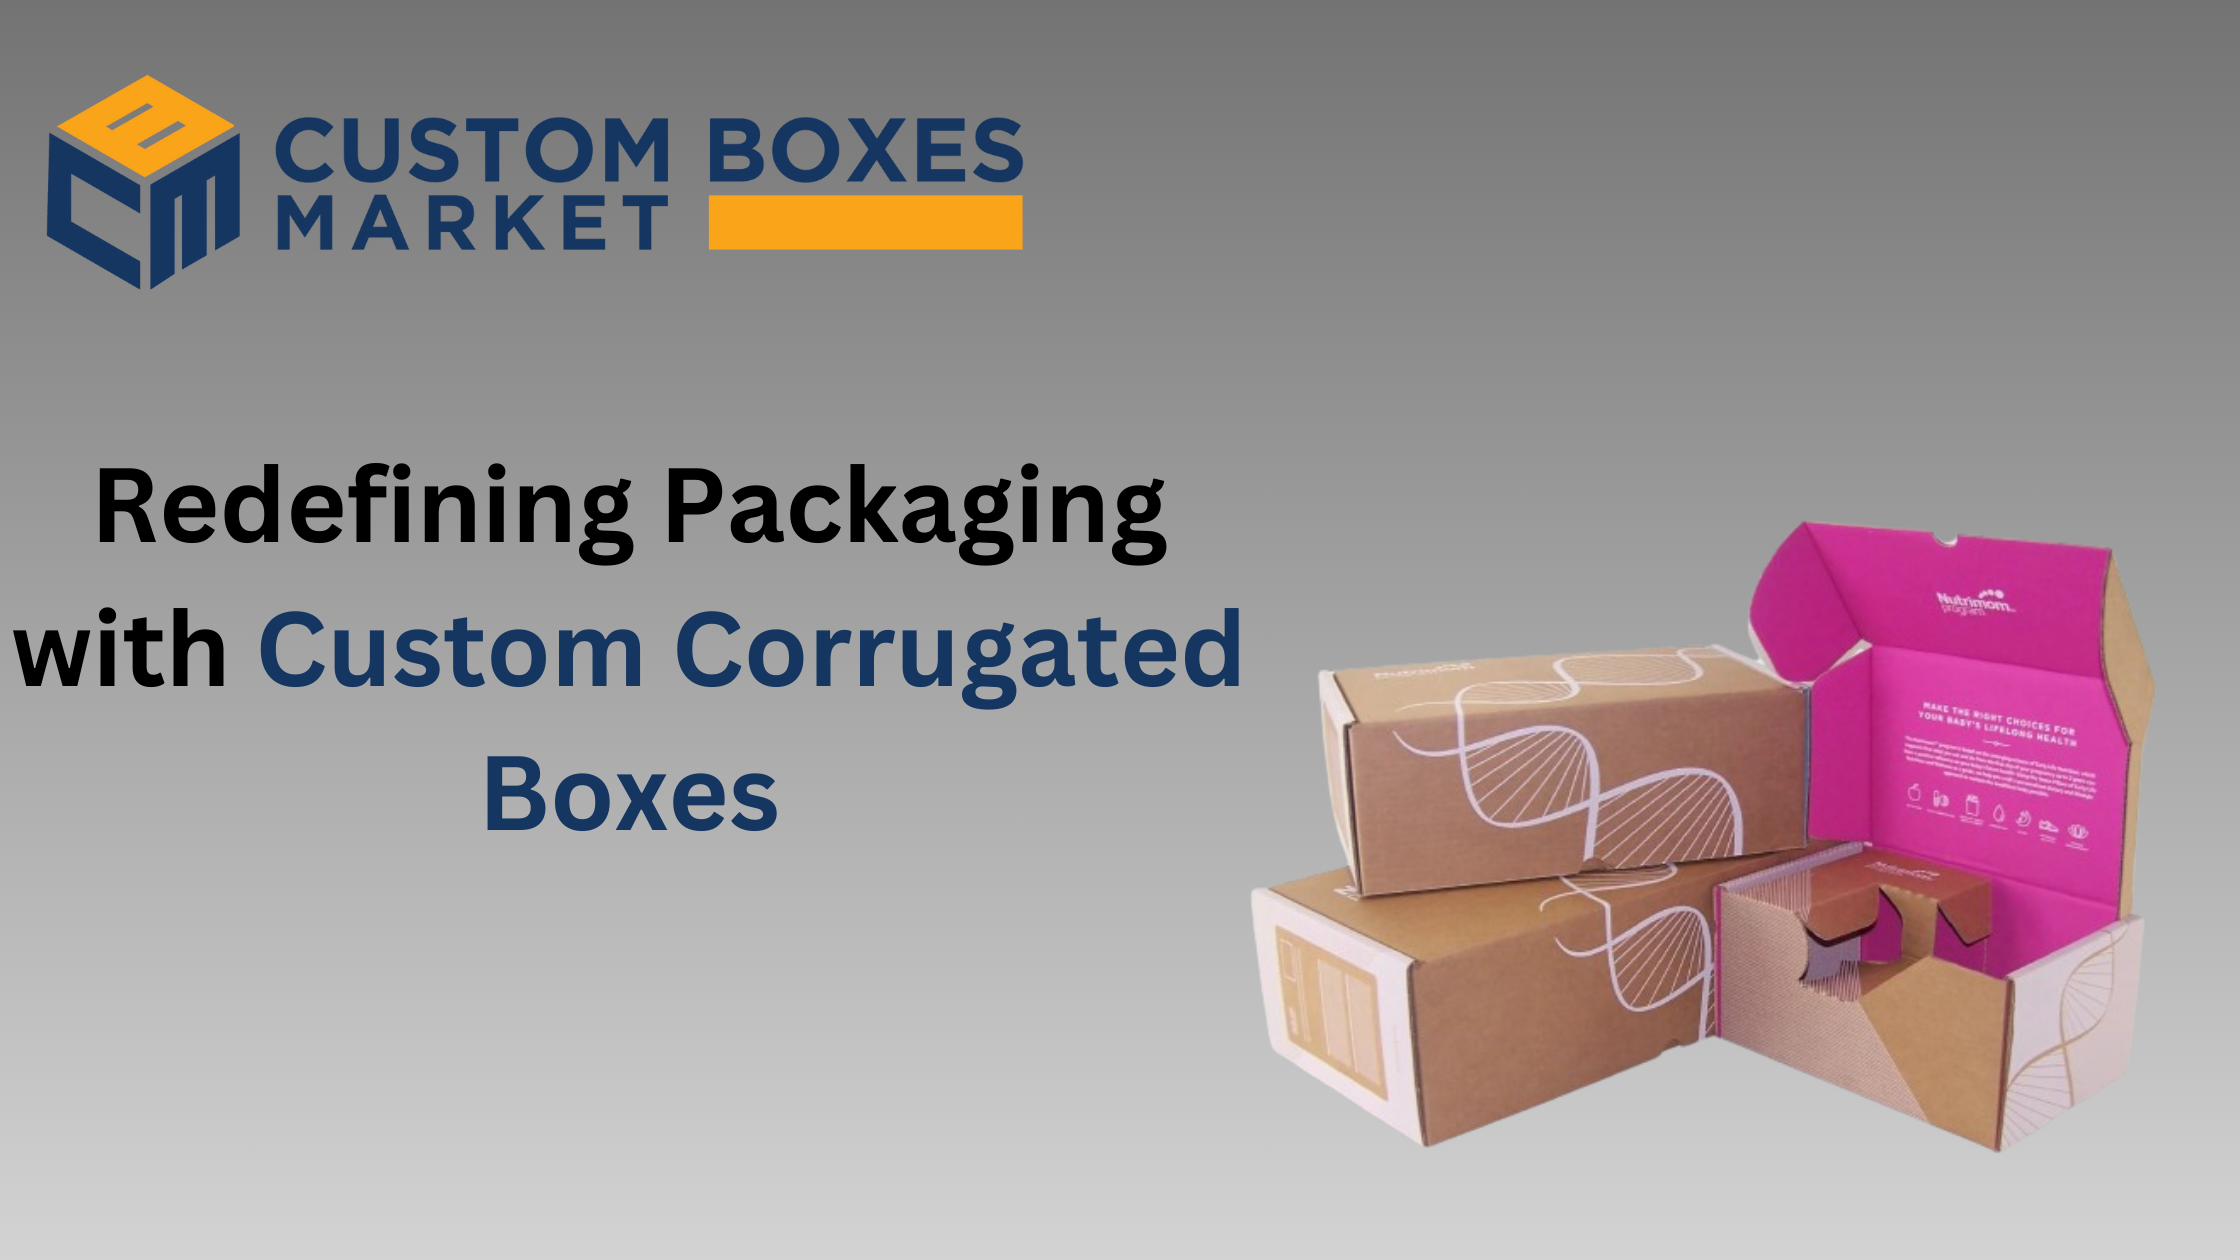 Redefining Packaging with Custom Corrugated Boxes